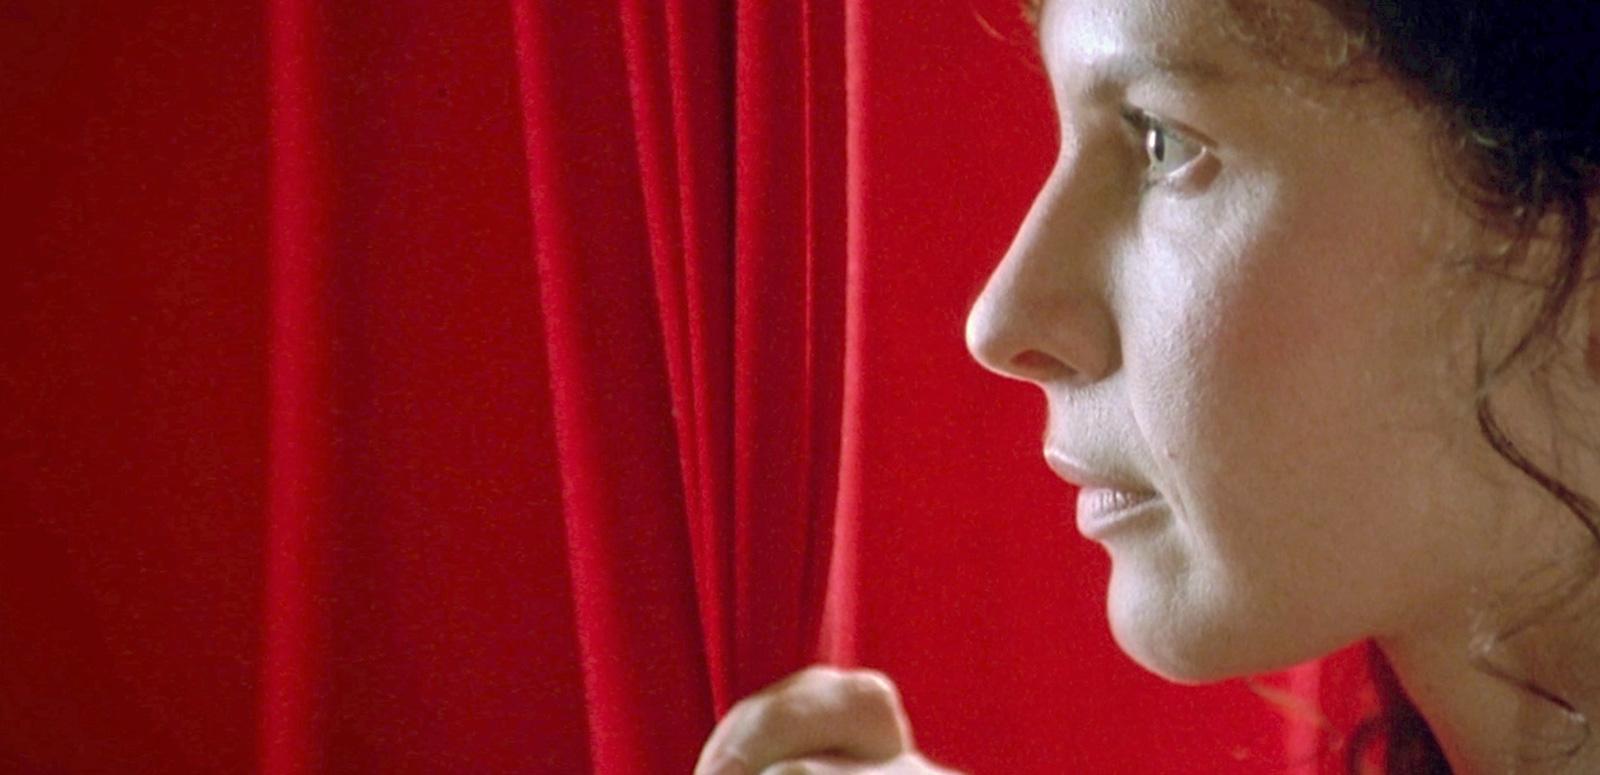 Close up of Tara Morice in profile as her character Fran in the film Strictly Ballroom. Fran his pulling aside a red curtain and looking past it, facing left of camera.